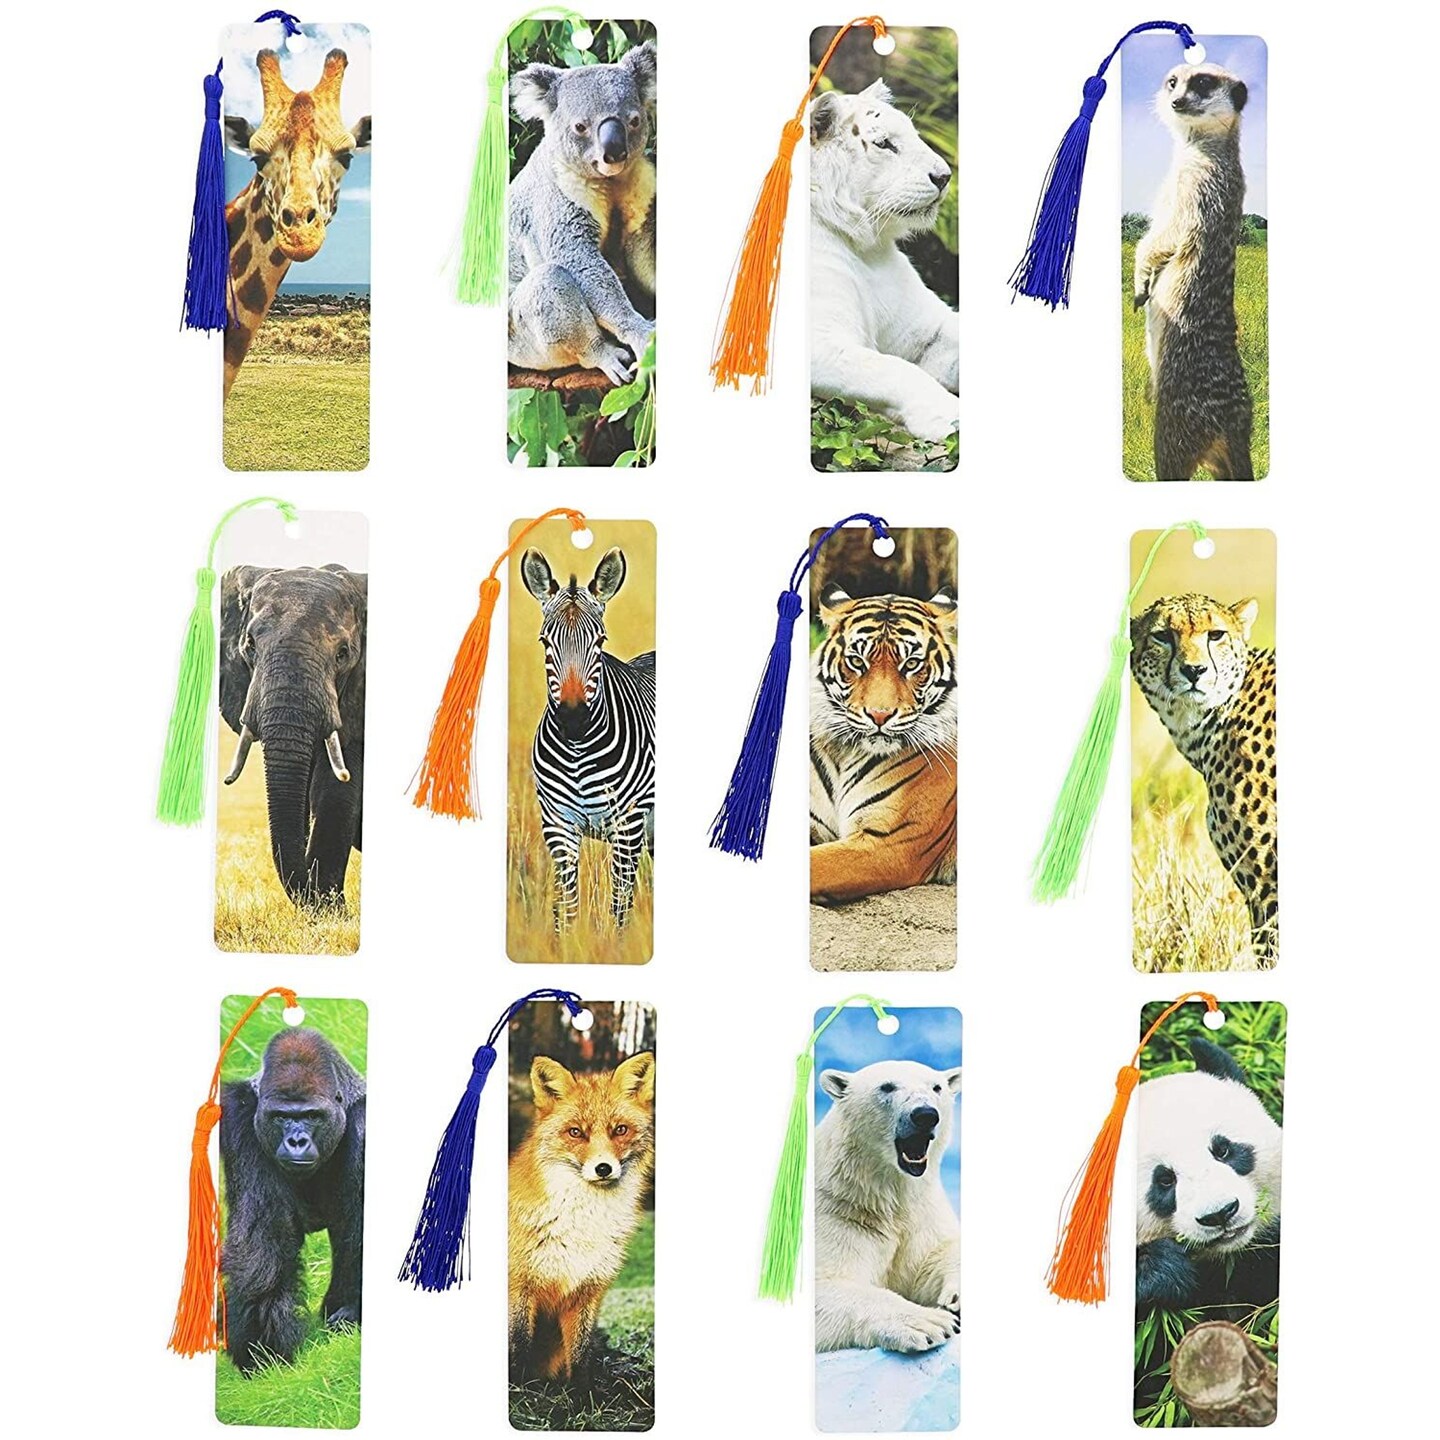 72 Pack Wildlife Animal Bookmarks with Tassels for Kids School